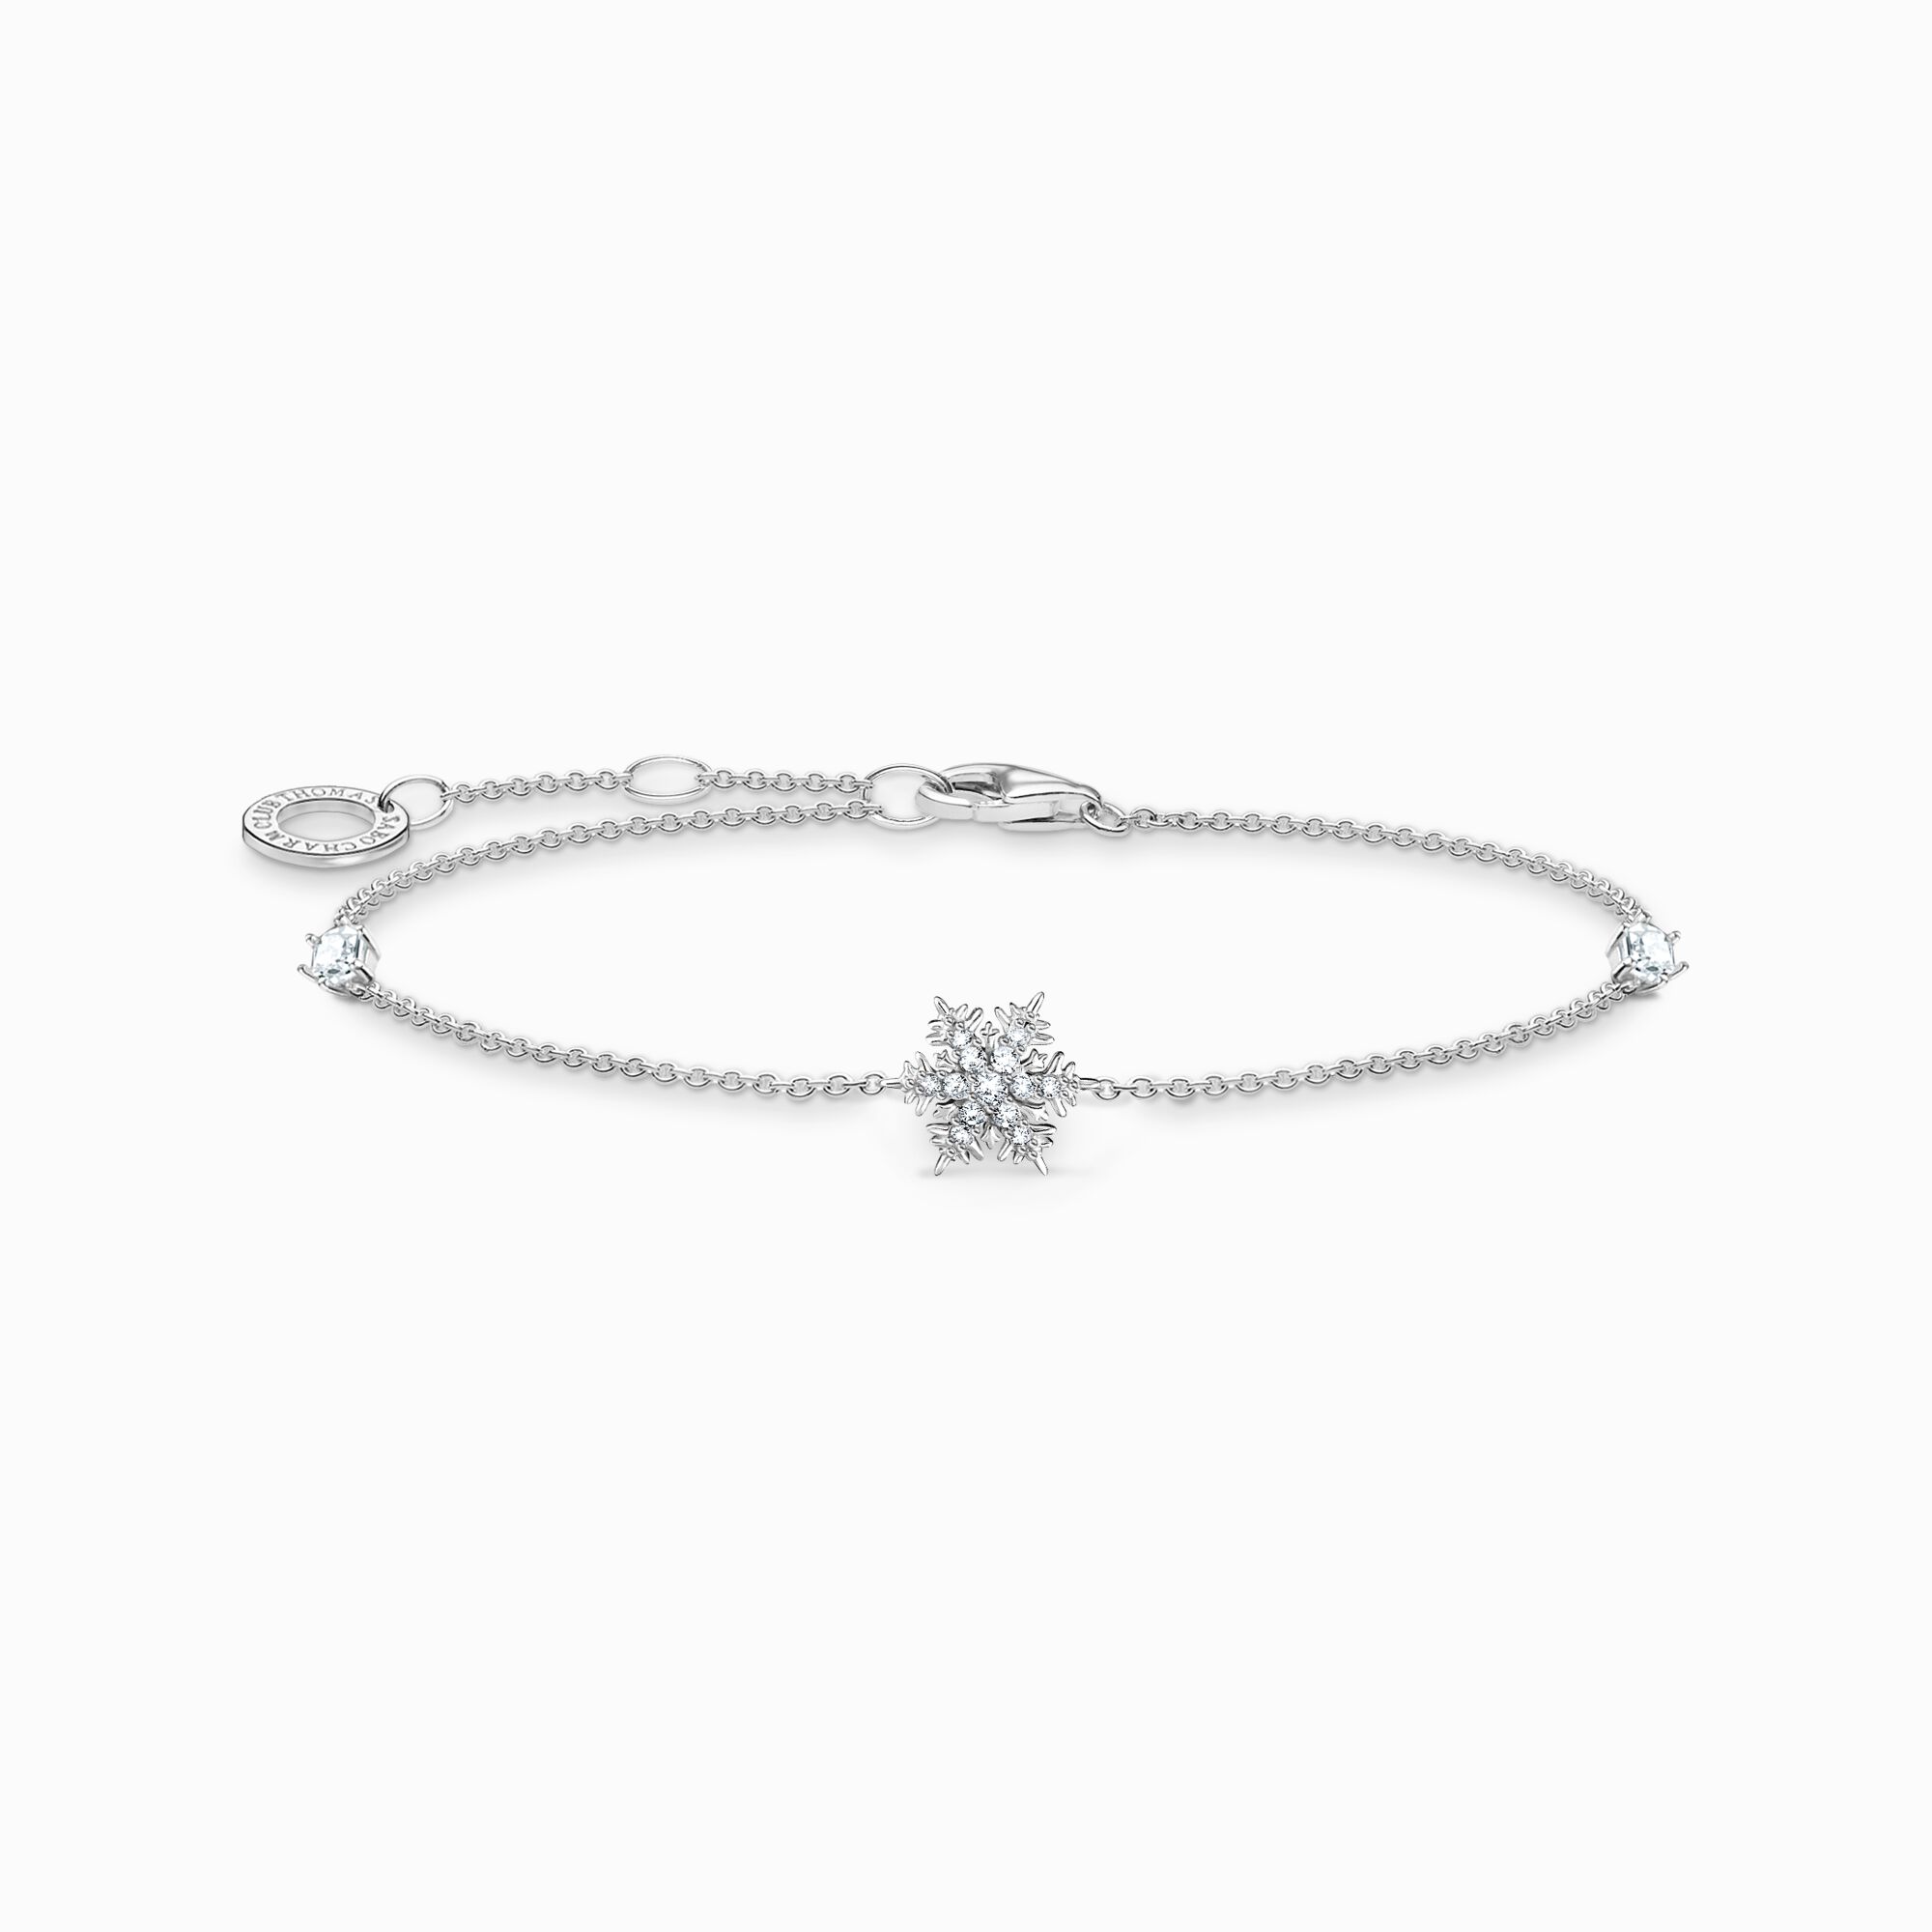 Bracelet snowflake with white stones silver from the Charming Collection collection in the THOMAS SABO online store